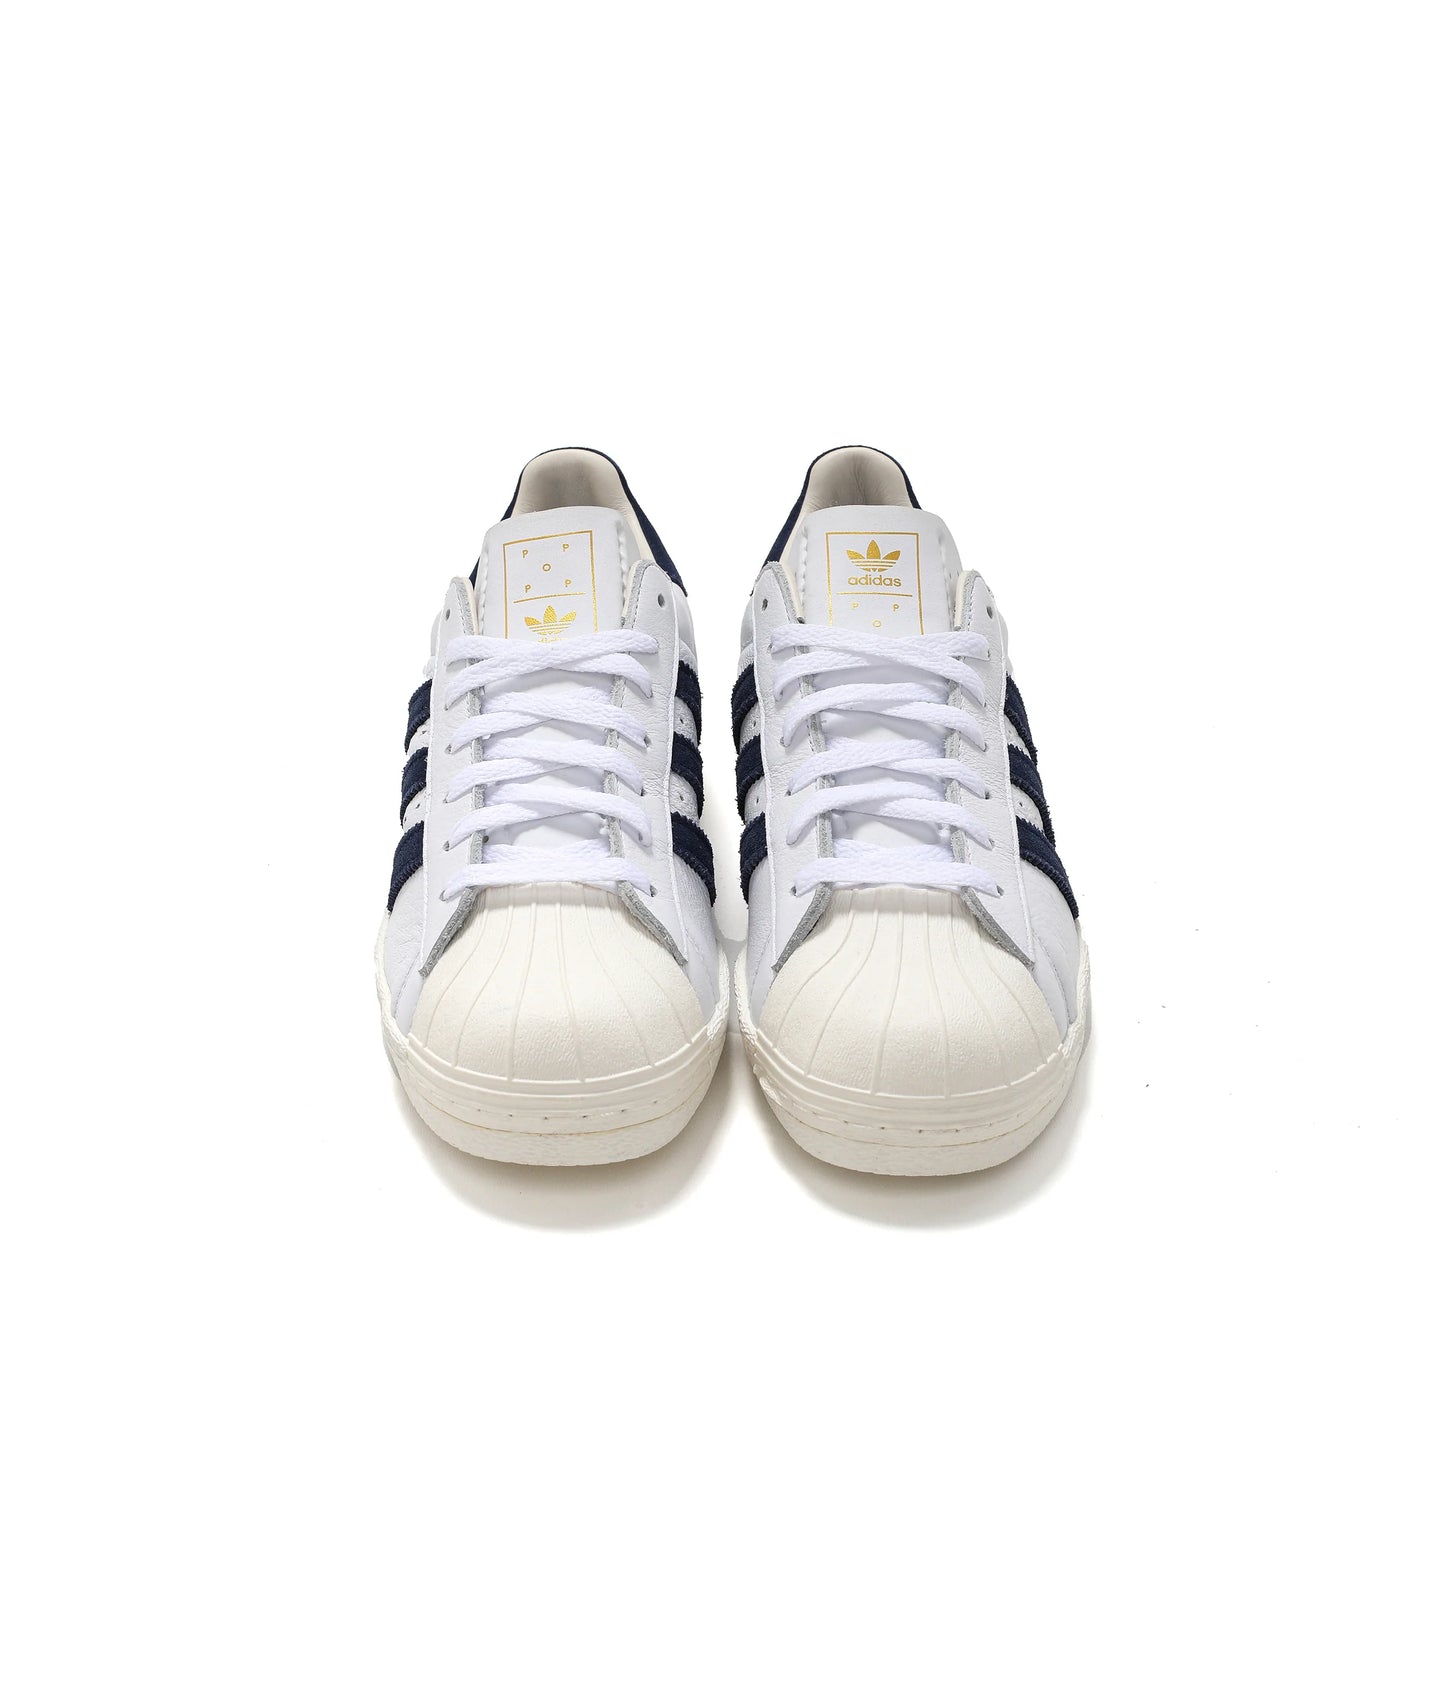 adidas X Pop Trading Co Supe Ftwwht/Conavy/Cwhite